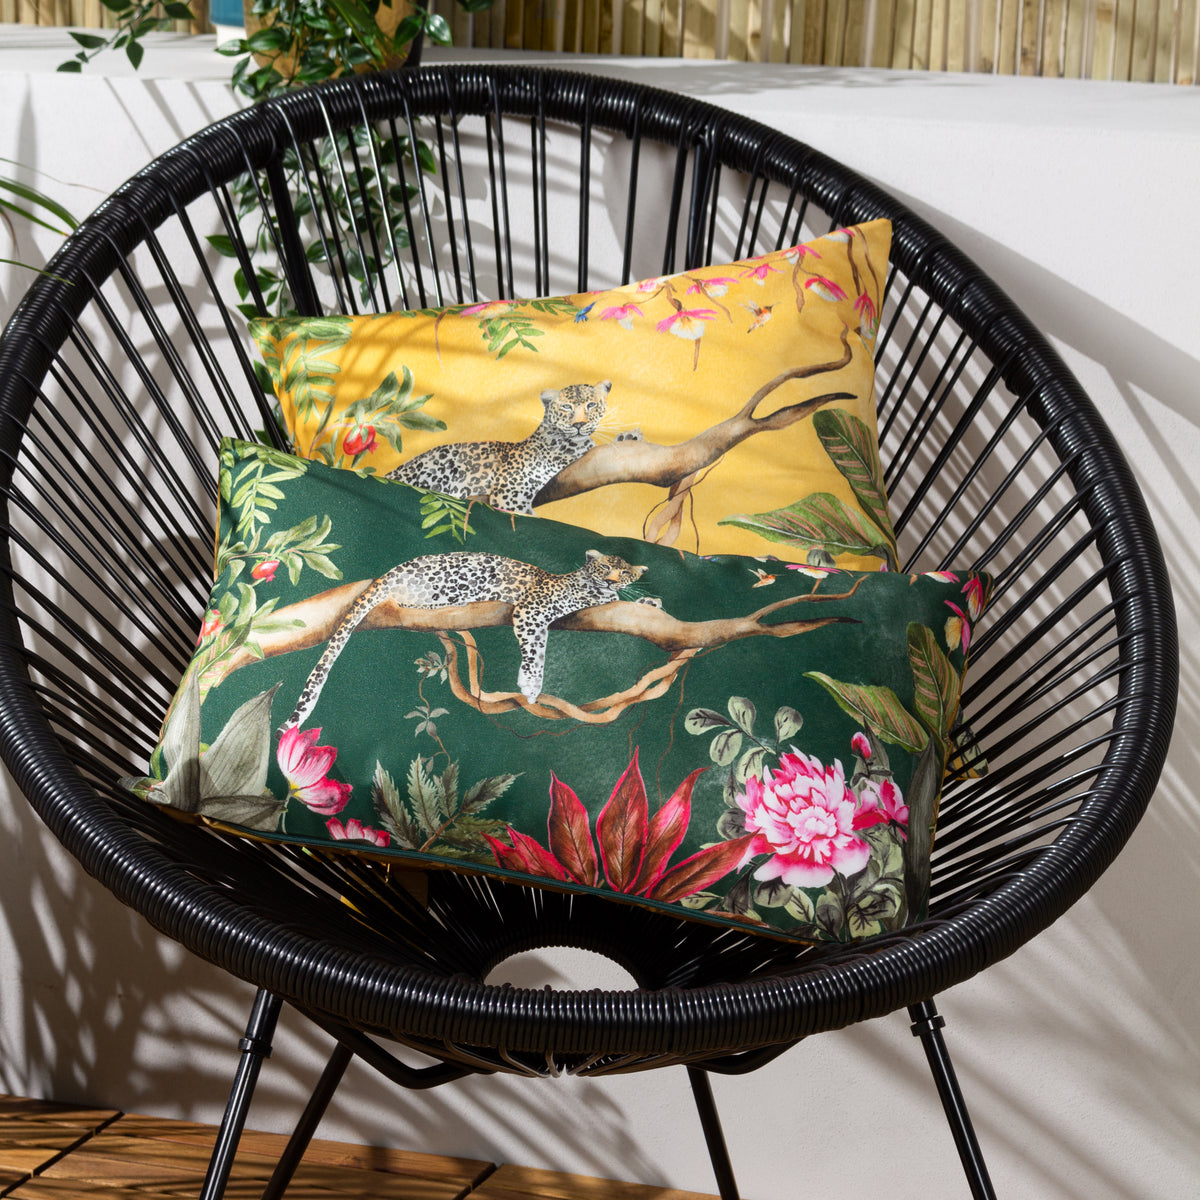 Leopard 50cm Reversible Outdoor Polyester Bolster Cushion